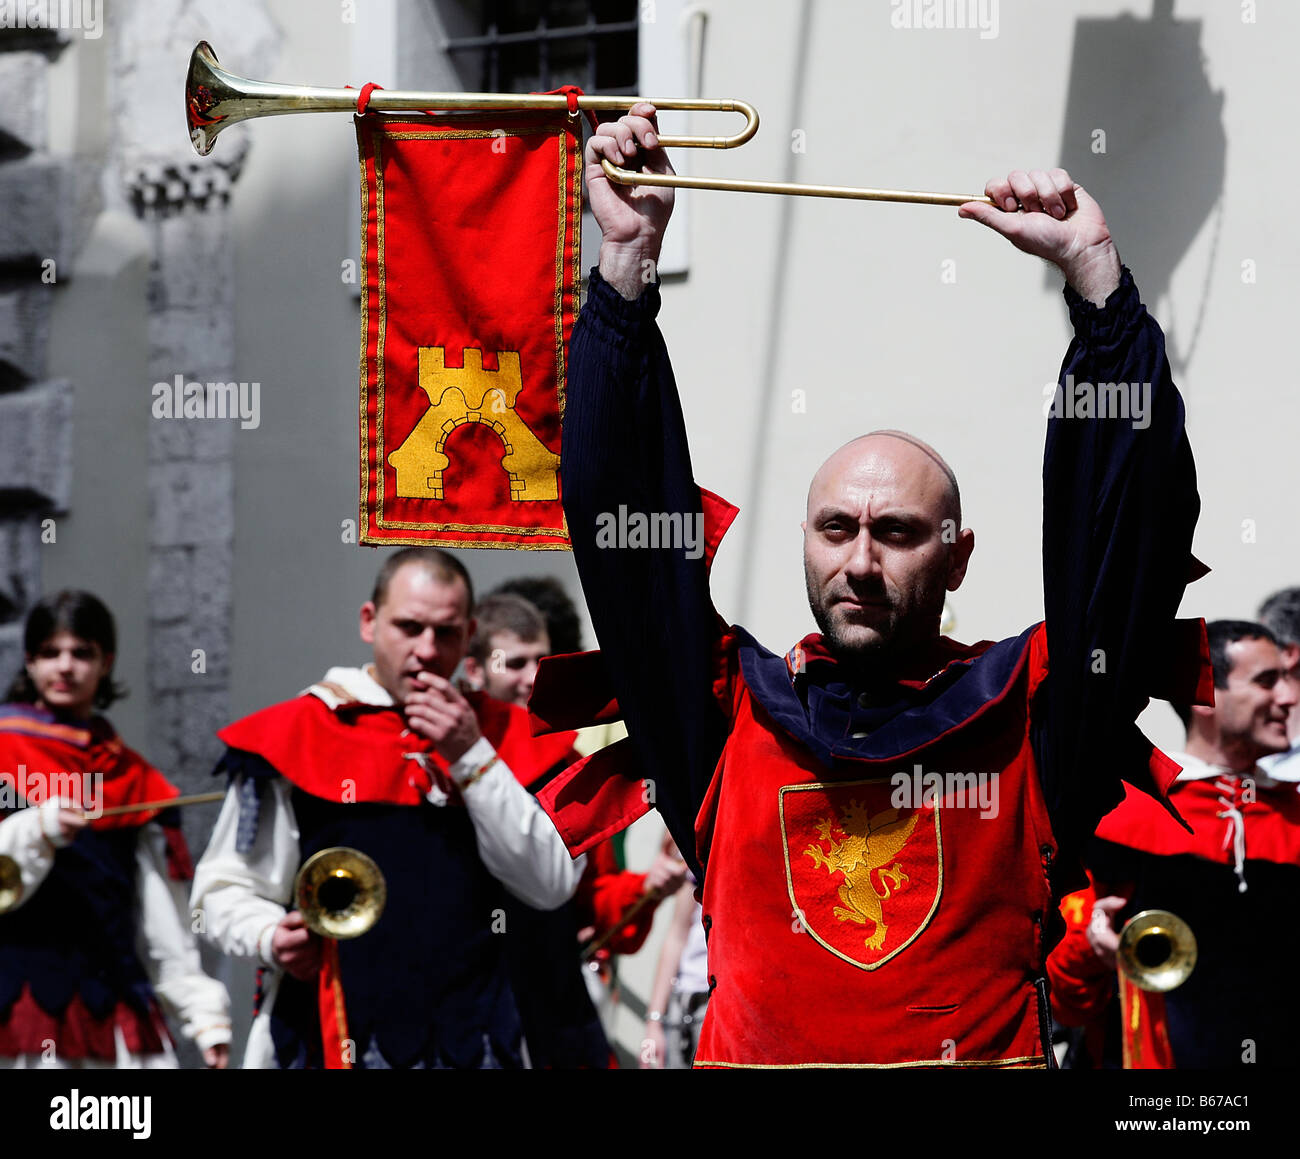 man marching in mediaeval costume holds trumpet above head in reenactment event Corsa all'Anello in Narni, Umbria, Italy Stock Photo